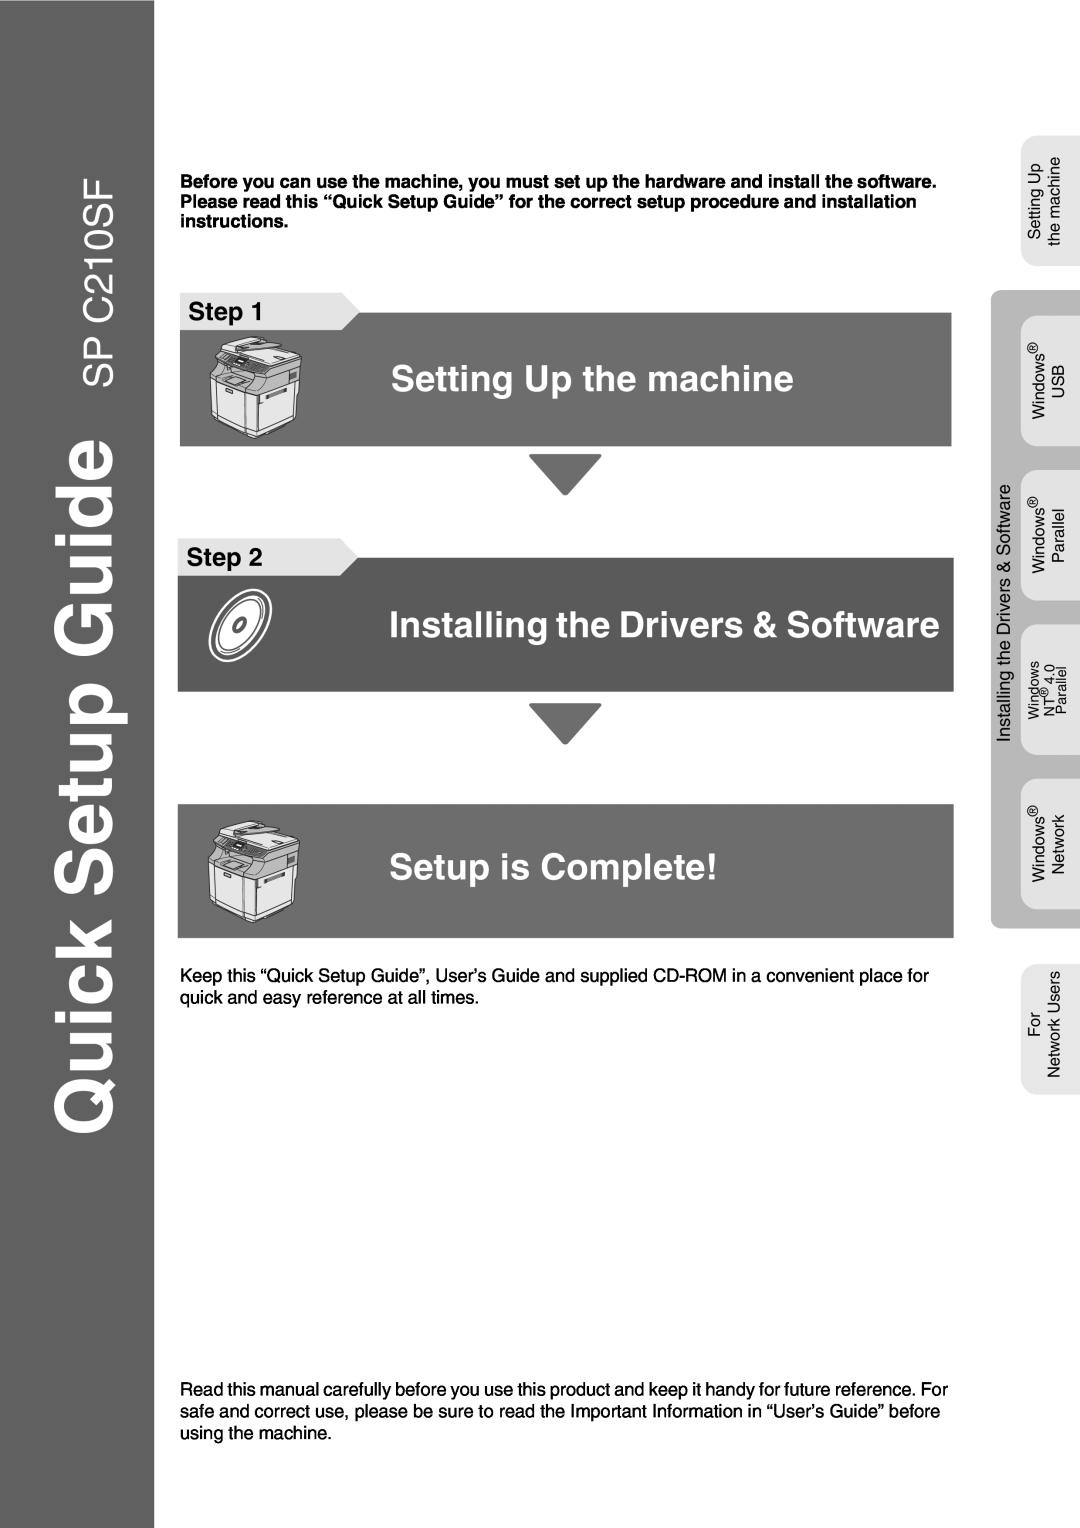 Microsoft SPC210SF setup guide Step, Quick Setup Guide SP C210SF, Setting Up the machine, Setup is Complete, instructions 